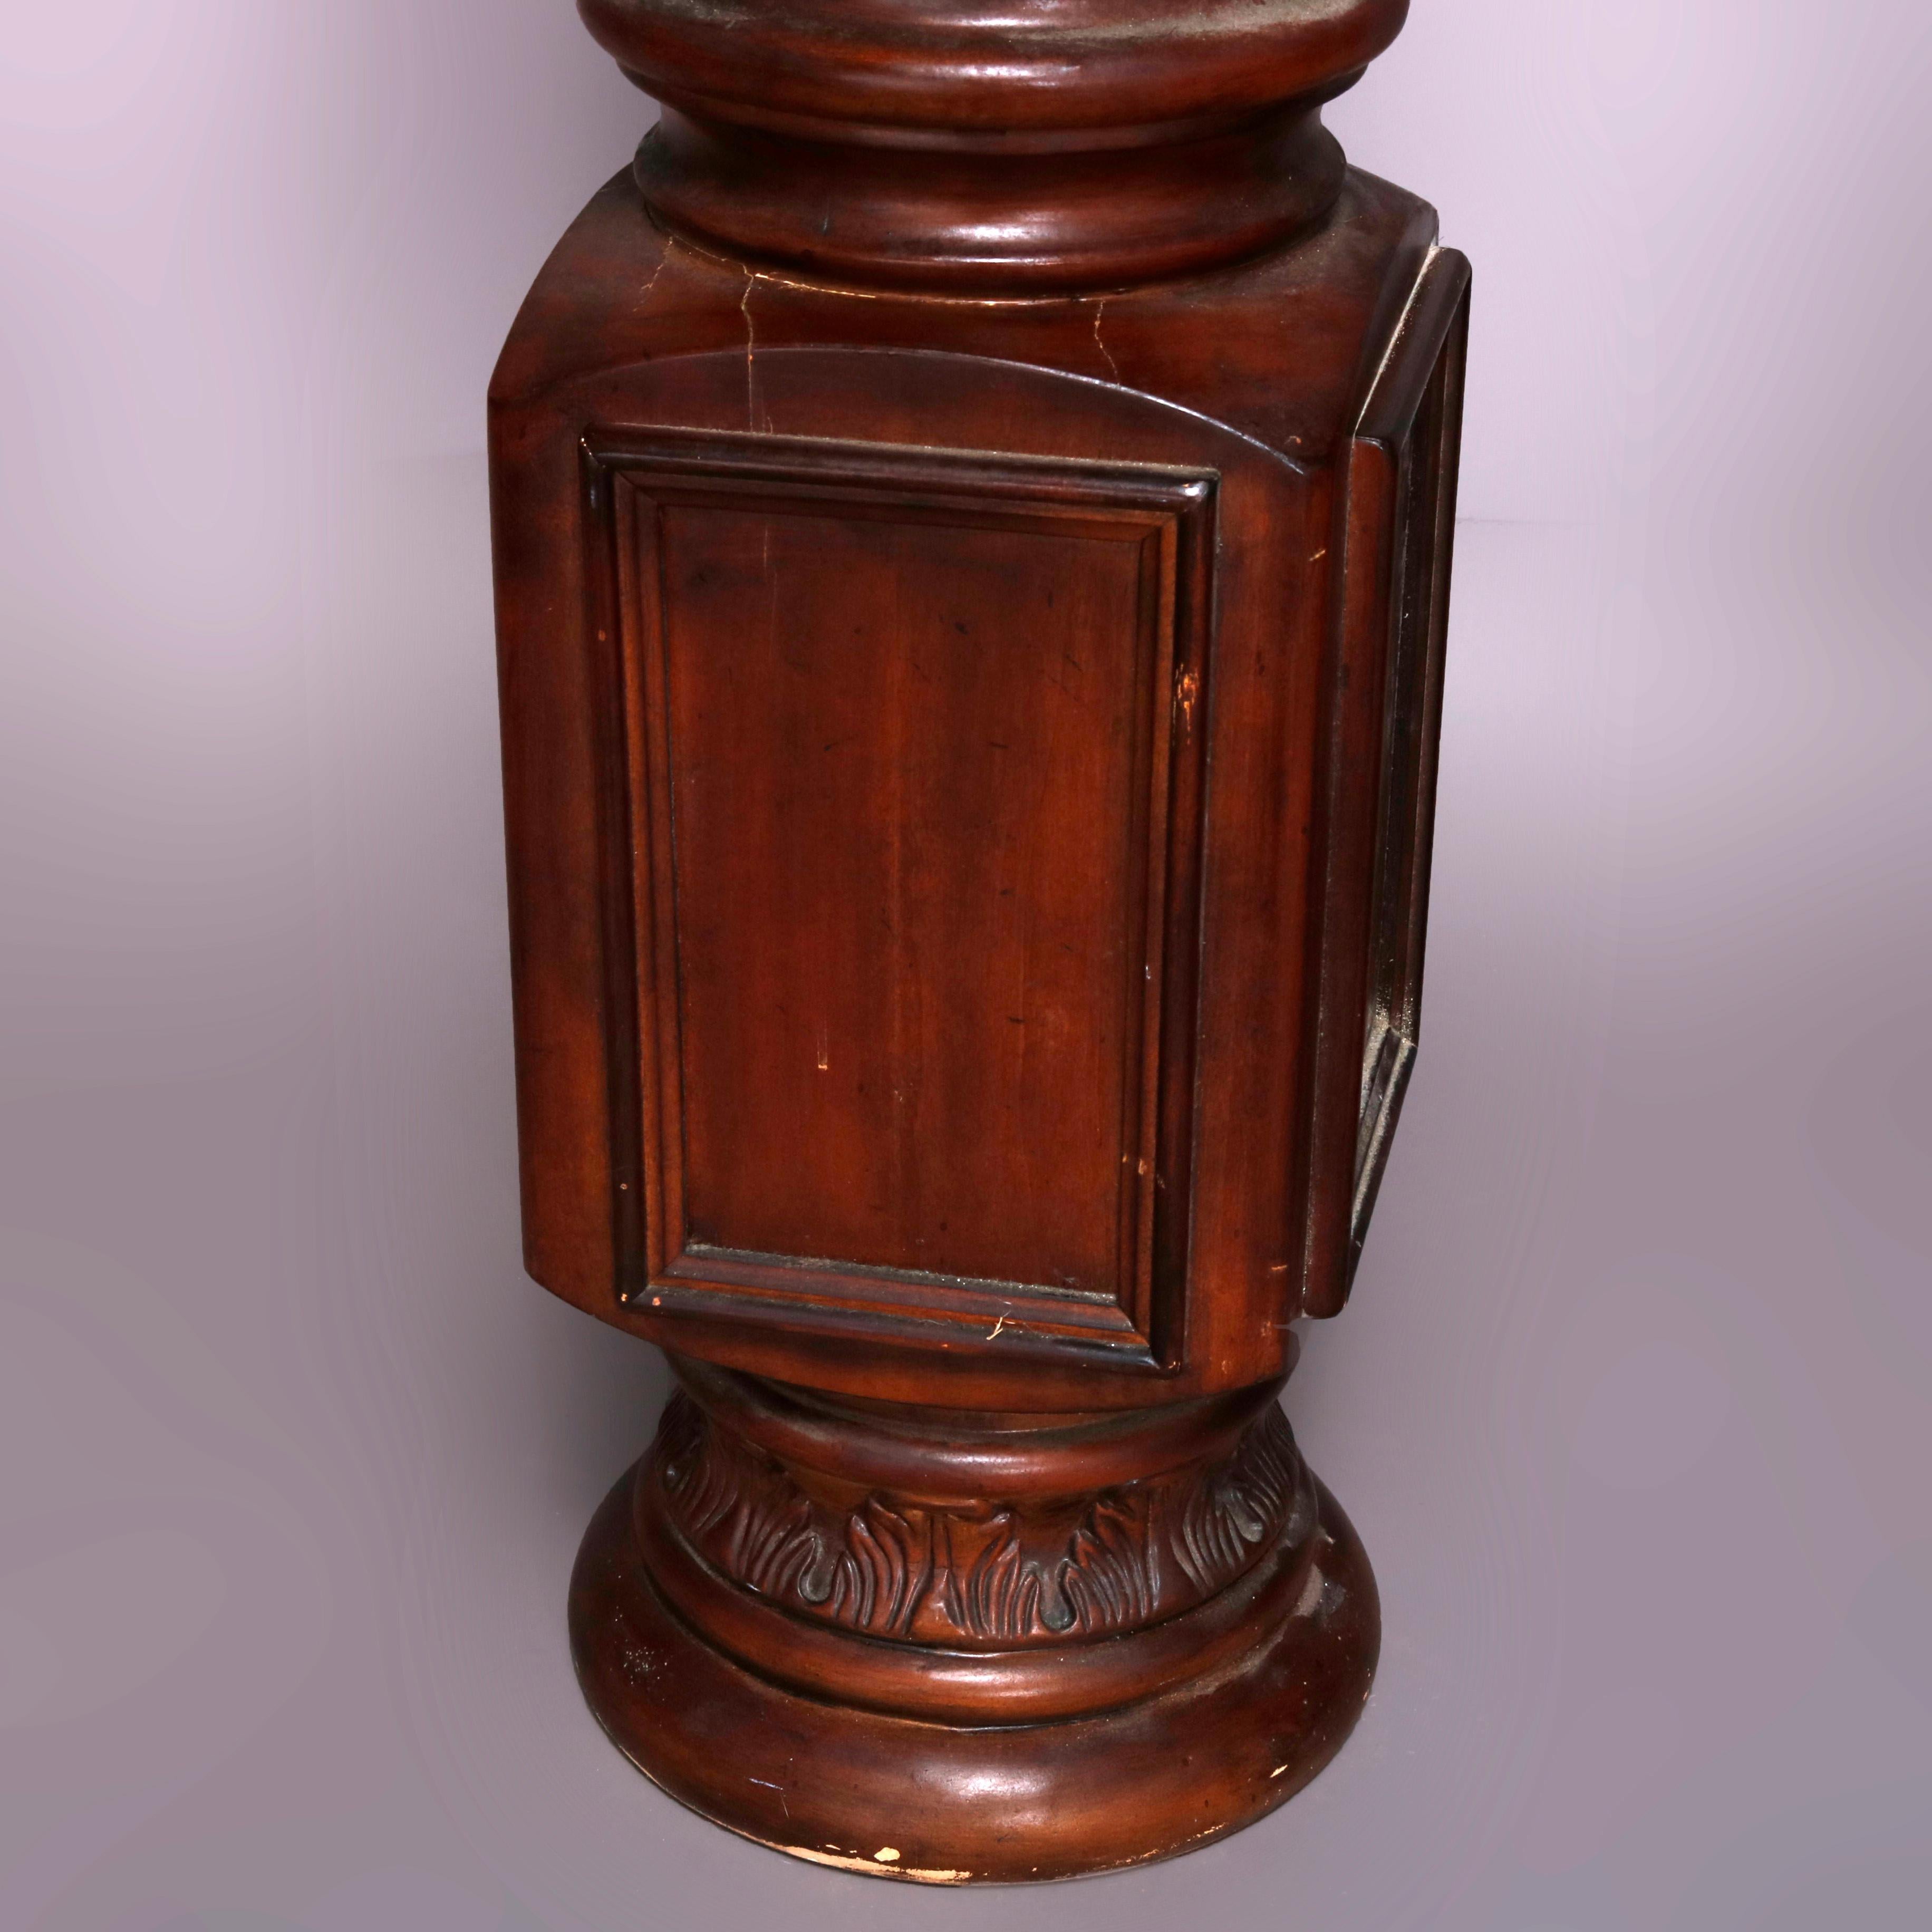 Composition Pair of Oversized Mahogany and Composite Architectural Columns, 20th Century